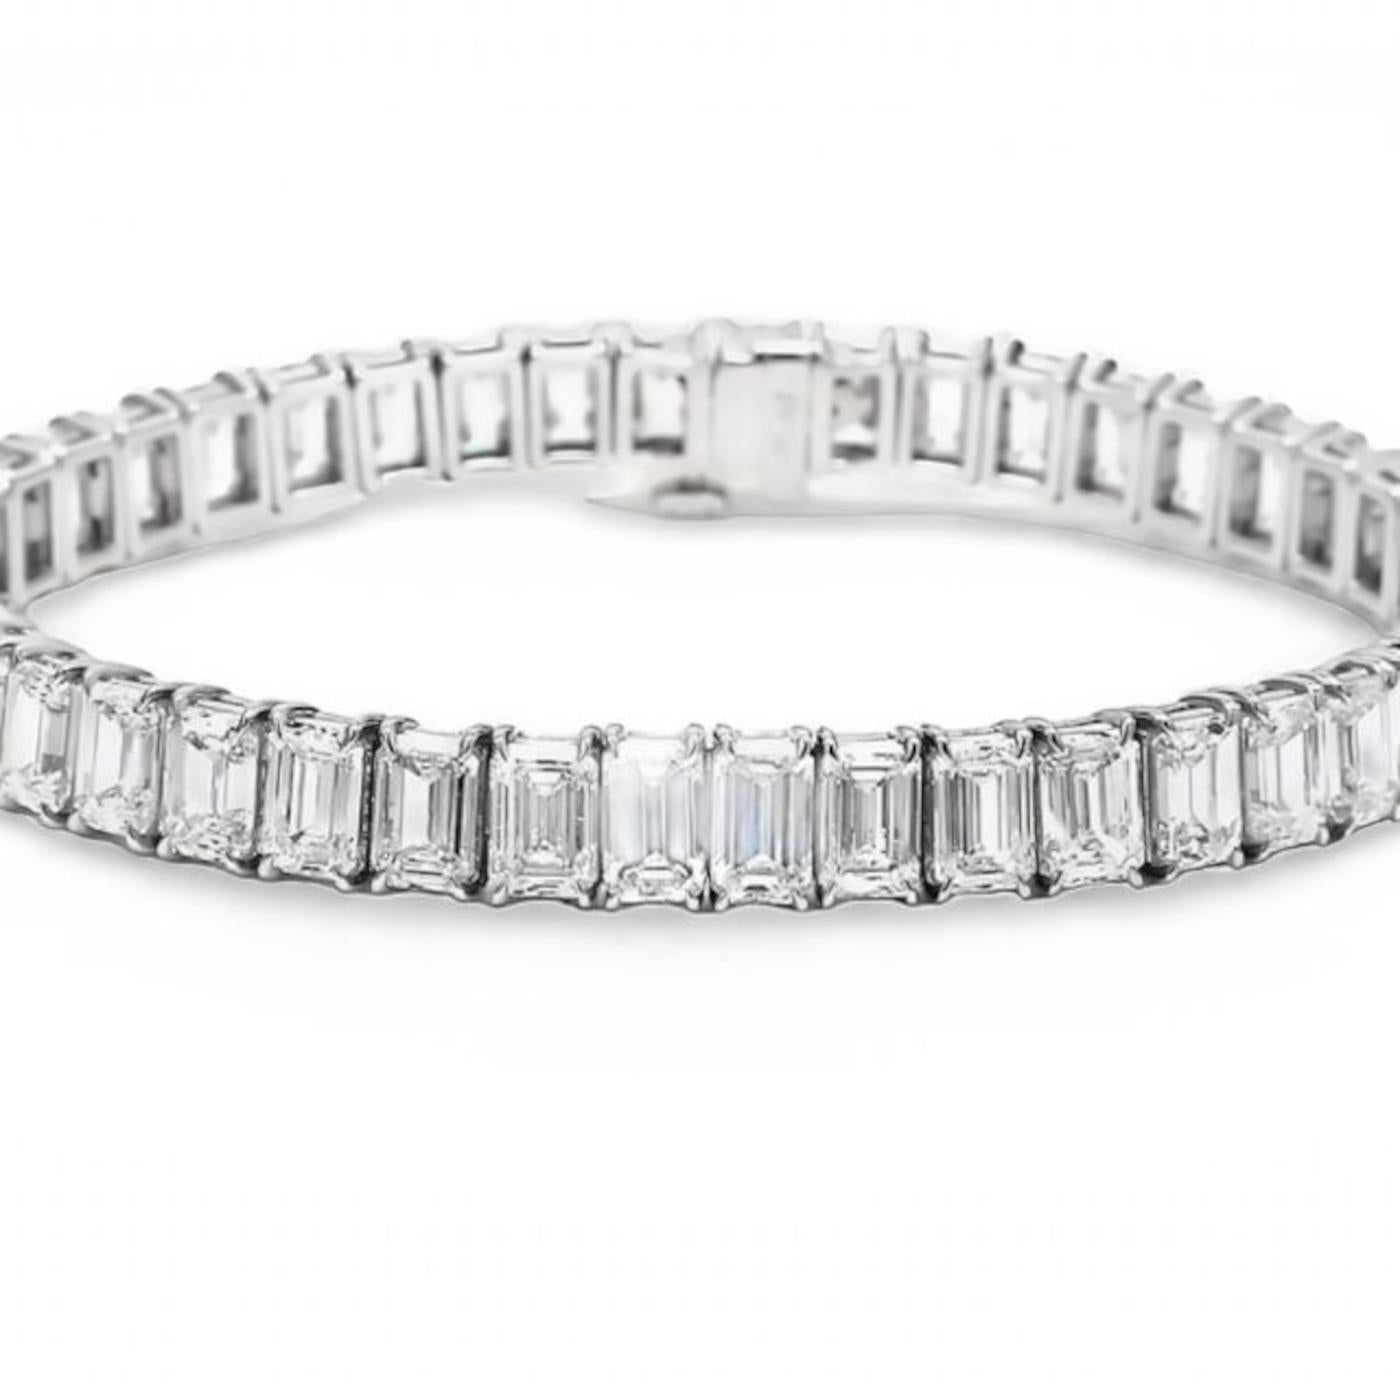 GIA Certified 28 Carat Emerald Cut Diamond Bracelet 40 GIA Certificates In New Condition For Sale In Rome, IT